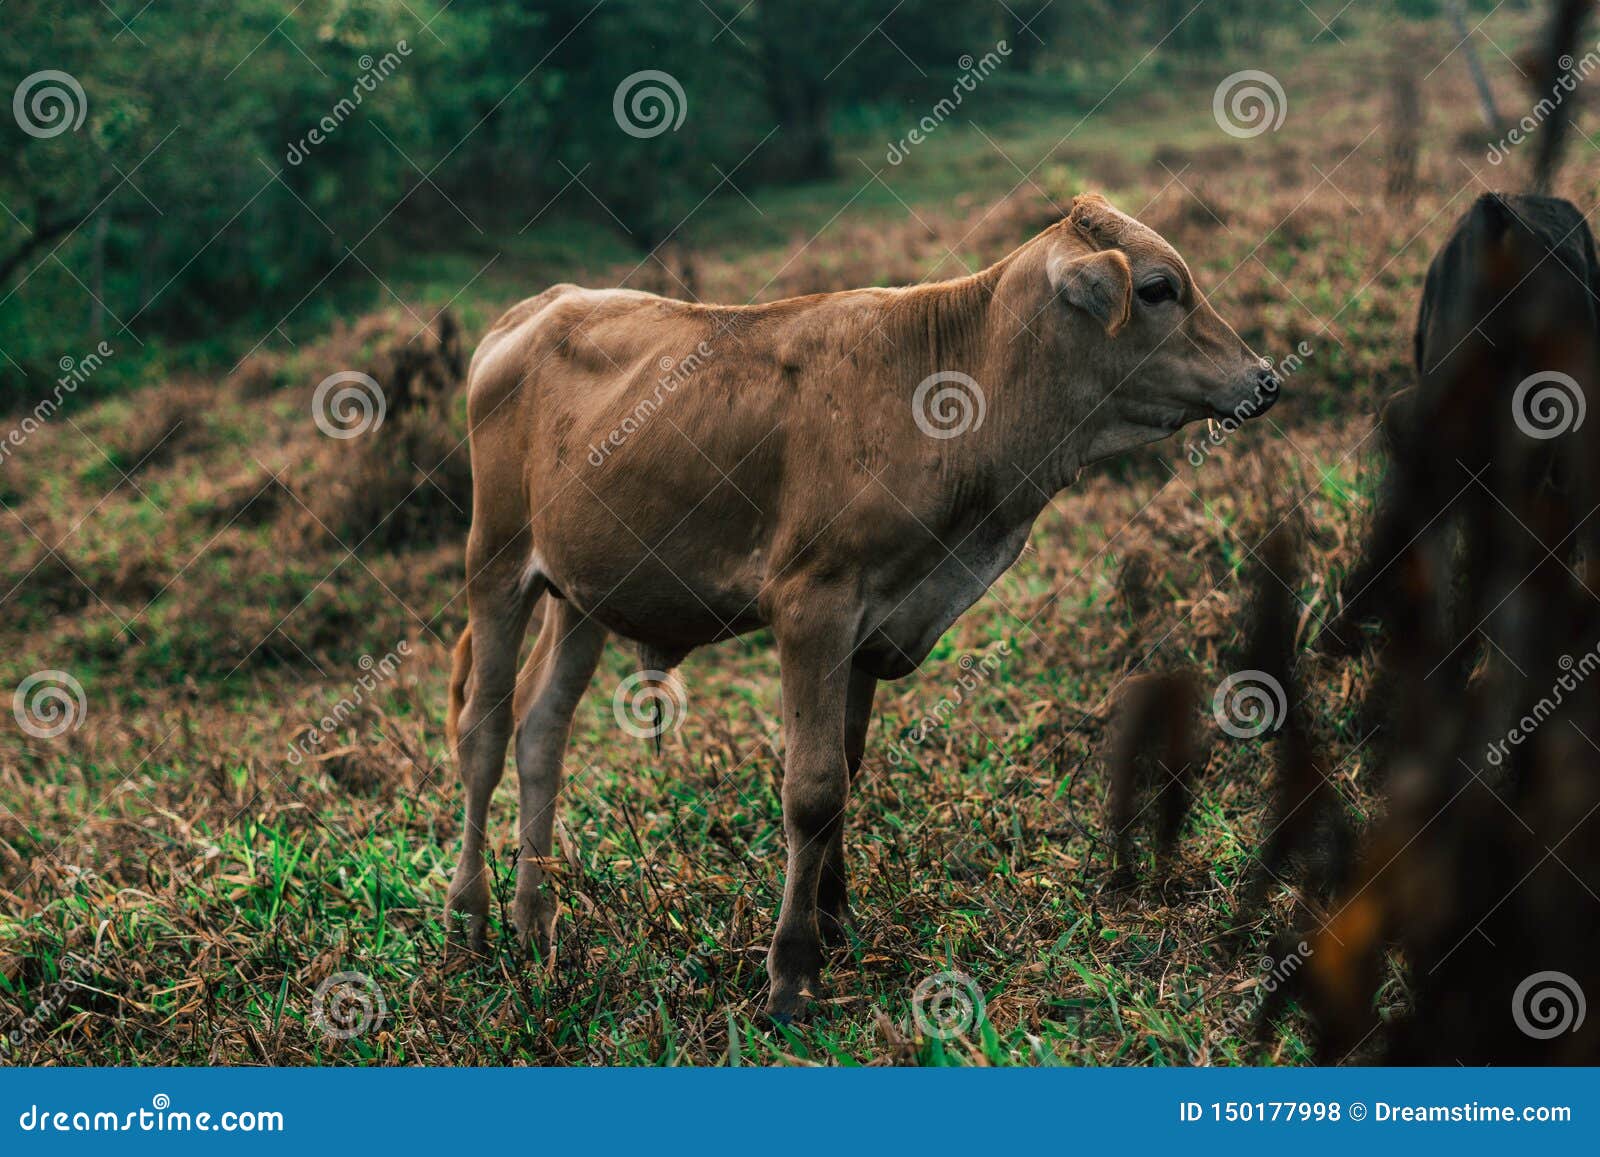 photo session to three sisters cows during sunset